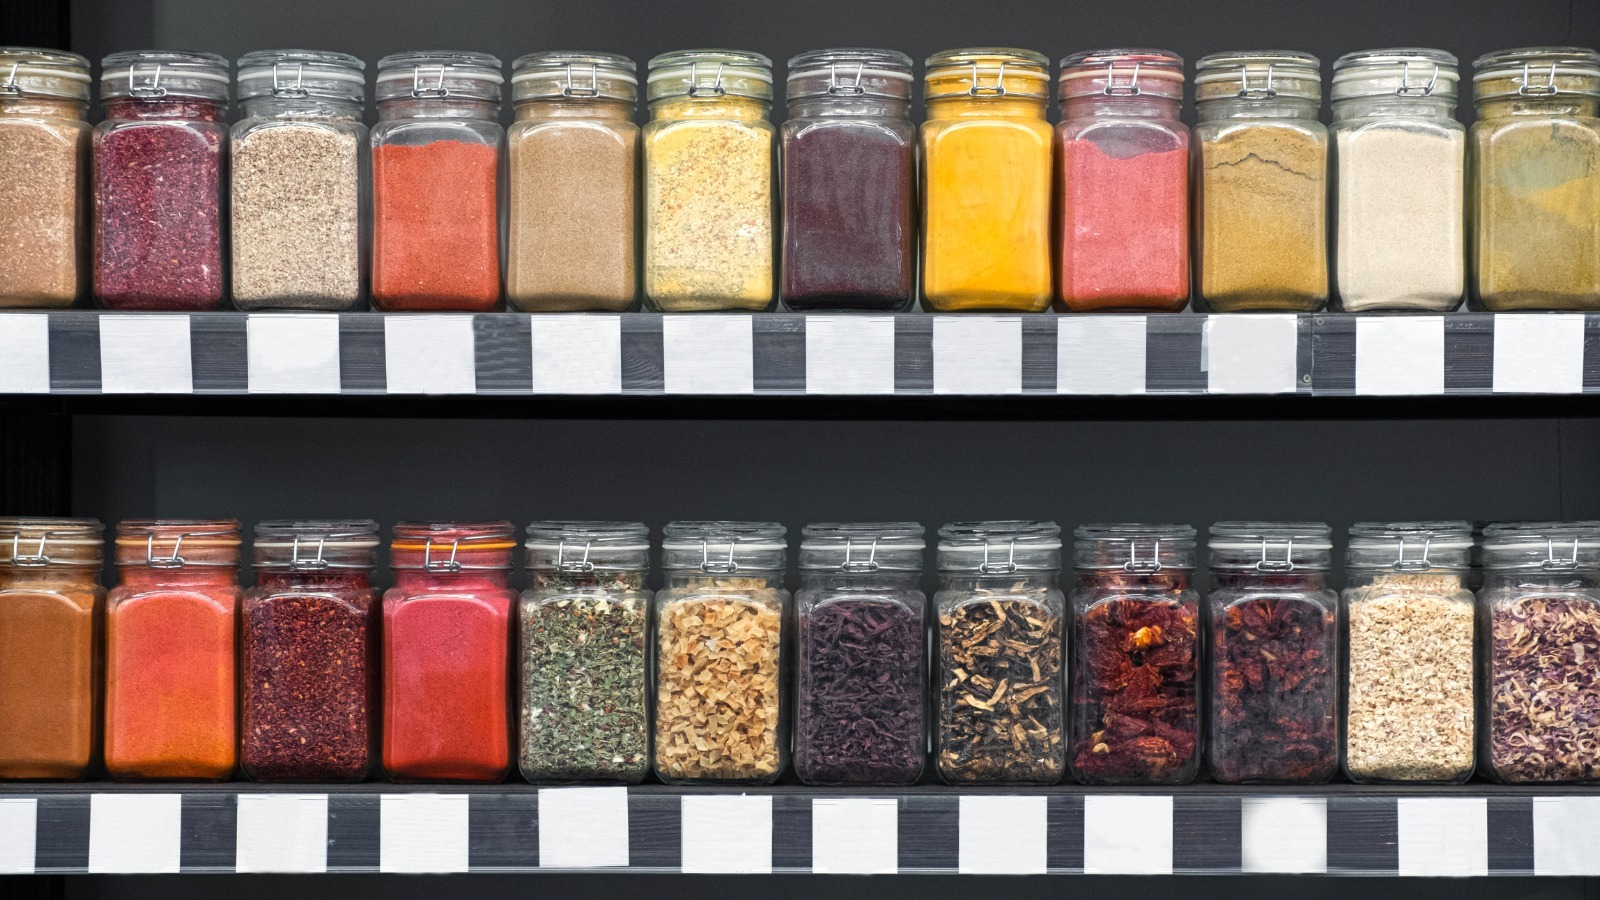 https://www.tastingtable.com/img/gallery/22-seasonings-and-spices-every-vegan-should-have-on-hand/l-intro-1675956005.jpg